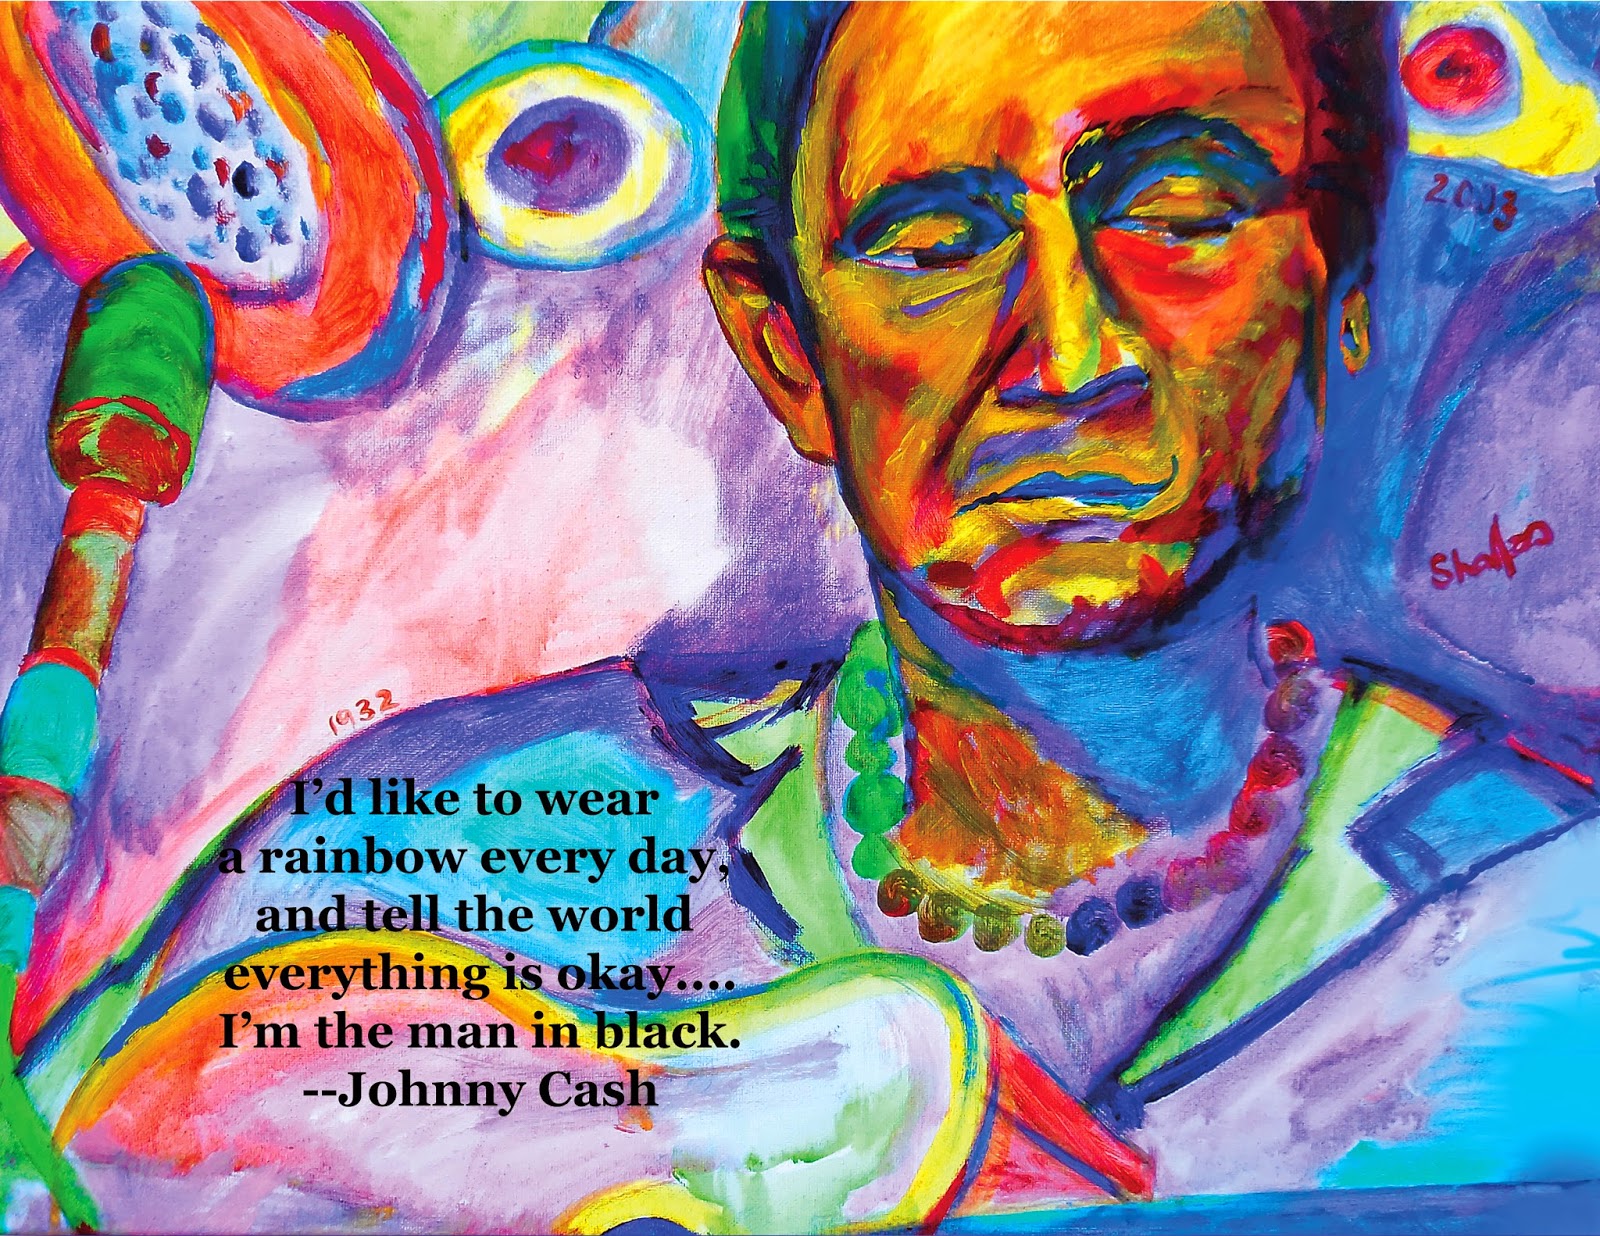 http://fineartamerica.com/featured/original-celebrity-painting-johnny-cash-by-shalla-the-artist-24x18-shalla-theartist.html?fb_ref=Default